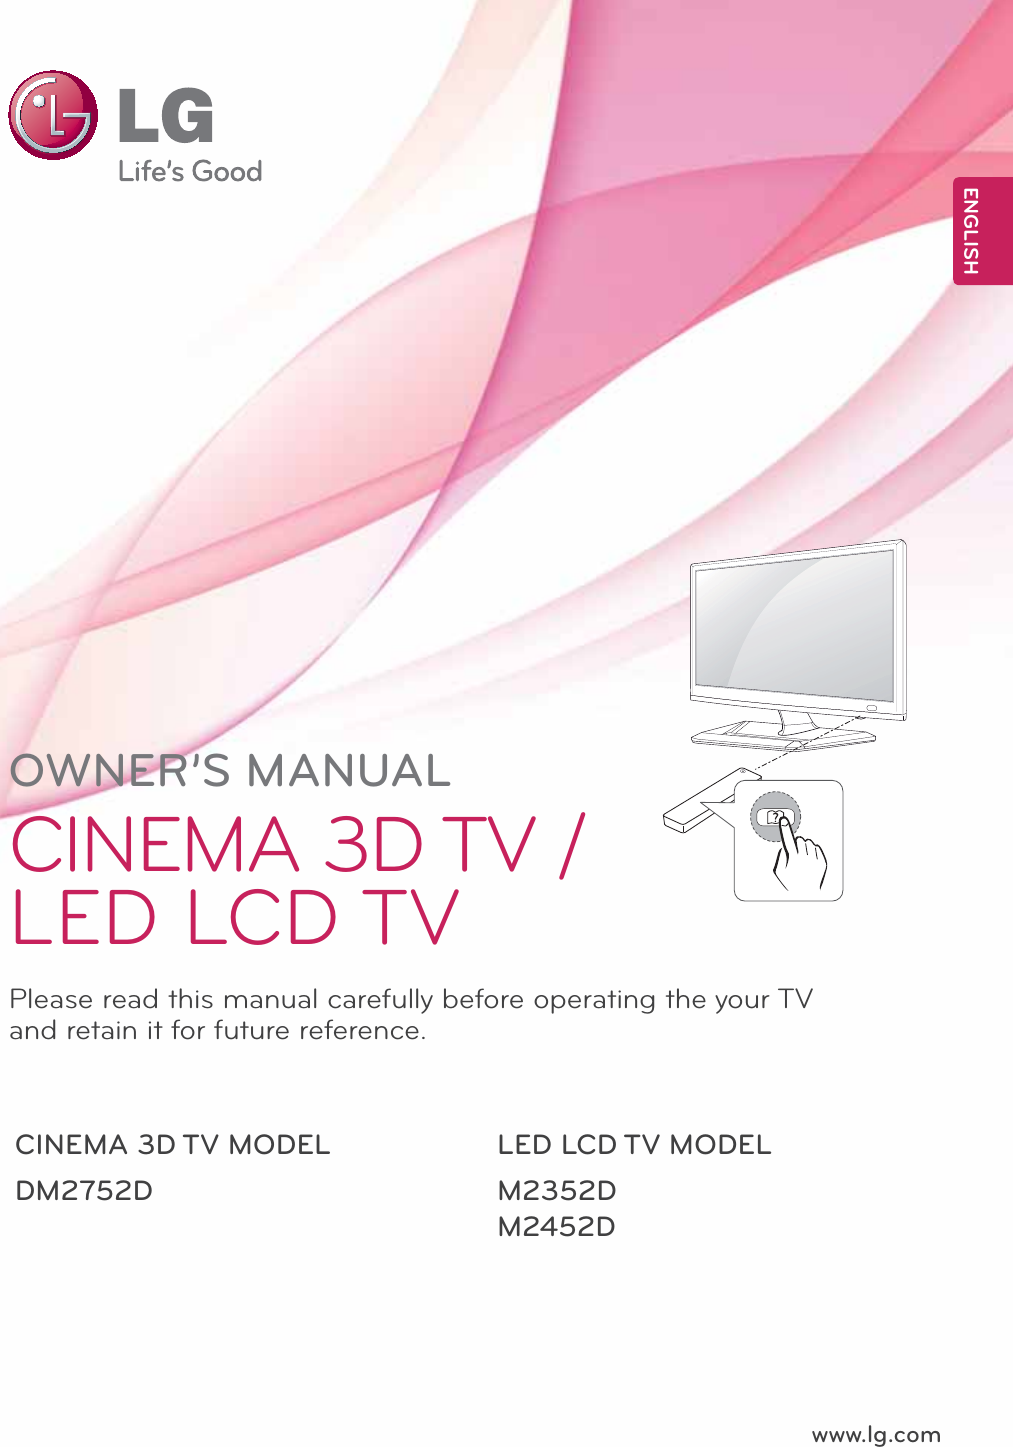 www.lg.comOWNER’S MANUALCINEMA 3D TV / LED LCD TVM2352DM2452DDM2752DPlease read this manual carefully before operating the your TV and retain it for future reference.LED LCD TV MODELCINEMA 3D TV MODEL ENGLISH